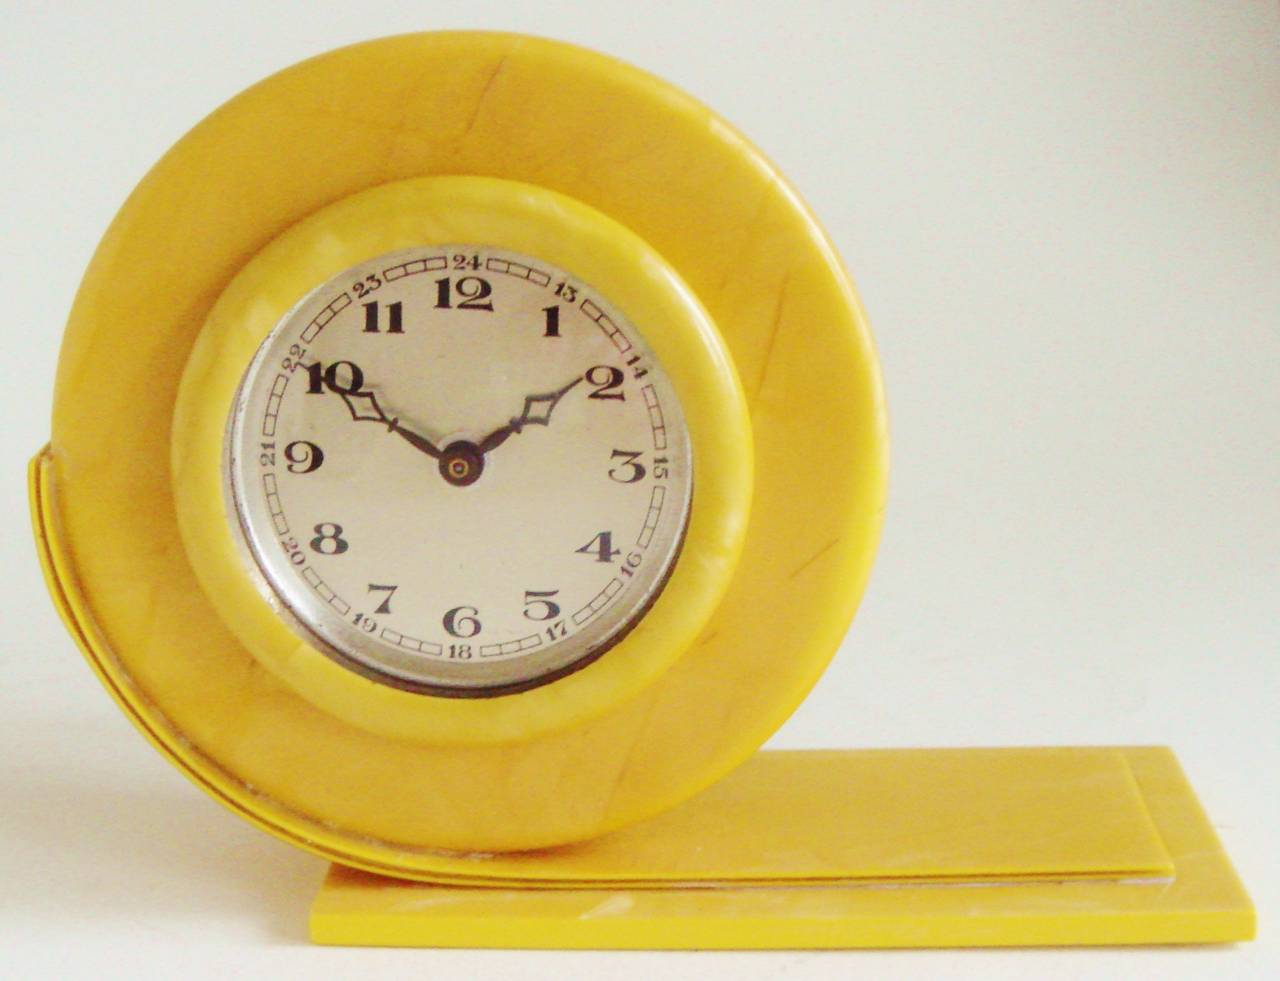 This beautiful little asymmetrical mechanical English Art Deco shelf clock is fashioned in bright yellow and marbled pearlescent celluloid. The clock is in fine and totally original condition with no discolouration, chips, cracks or scratches to the